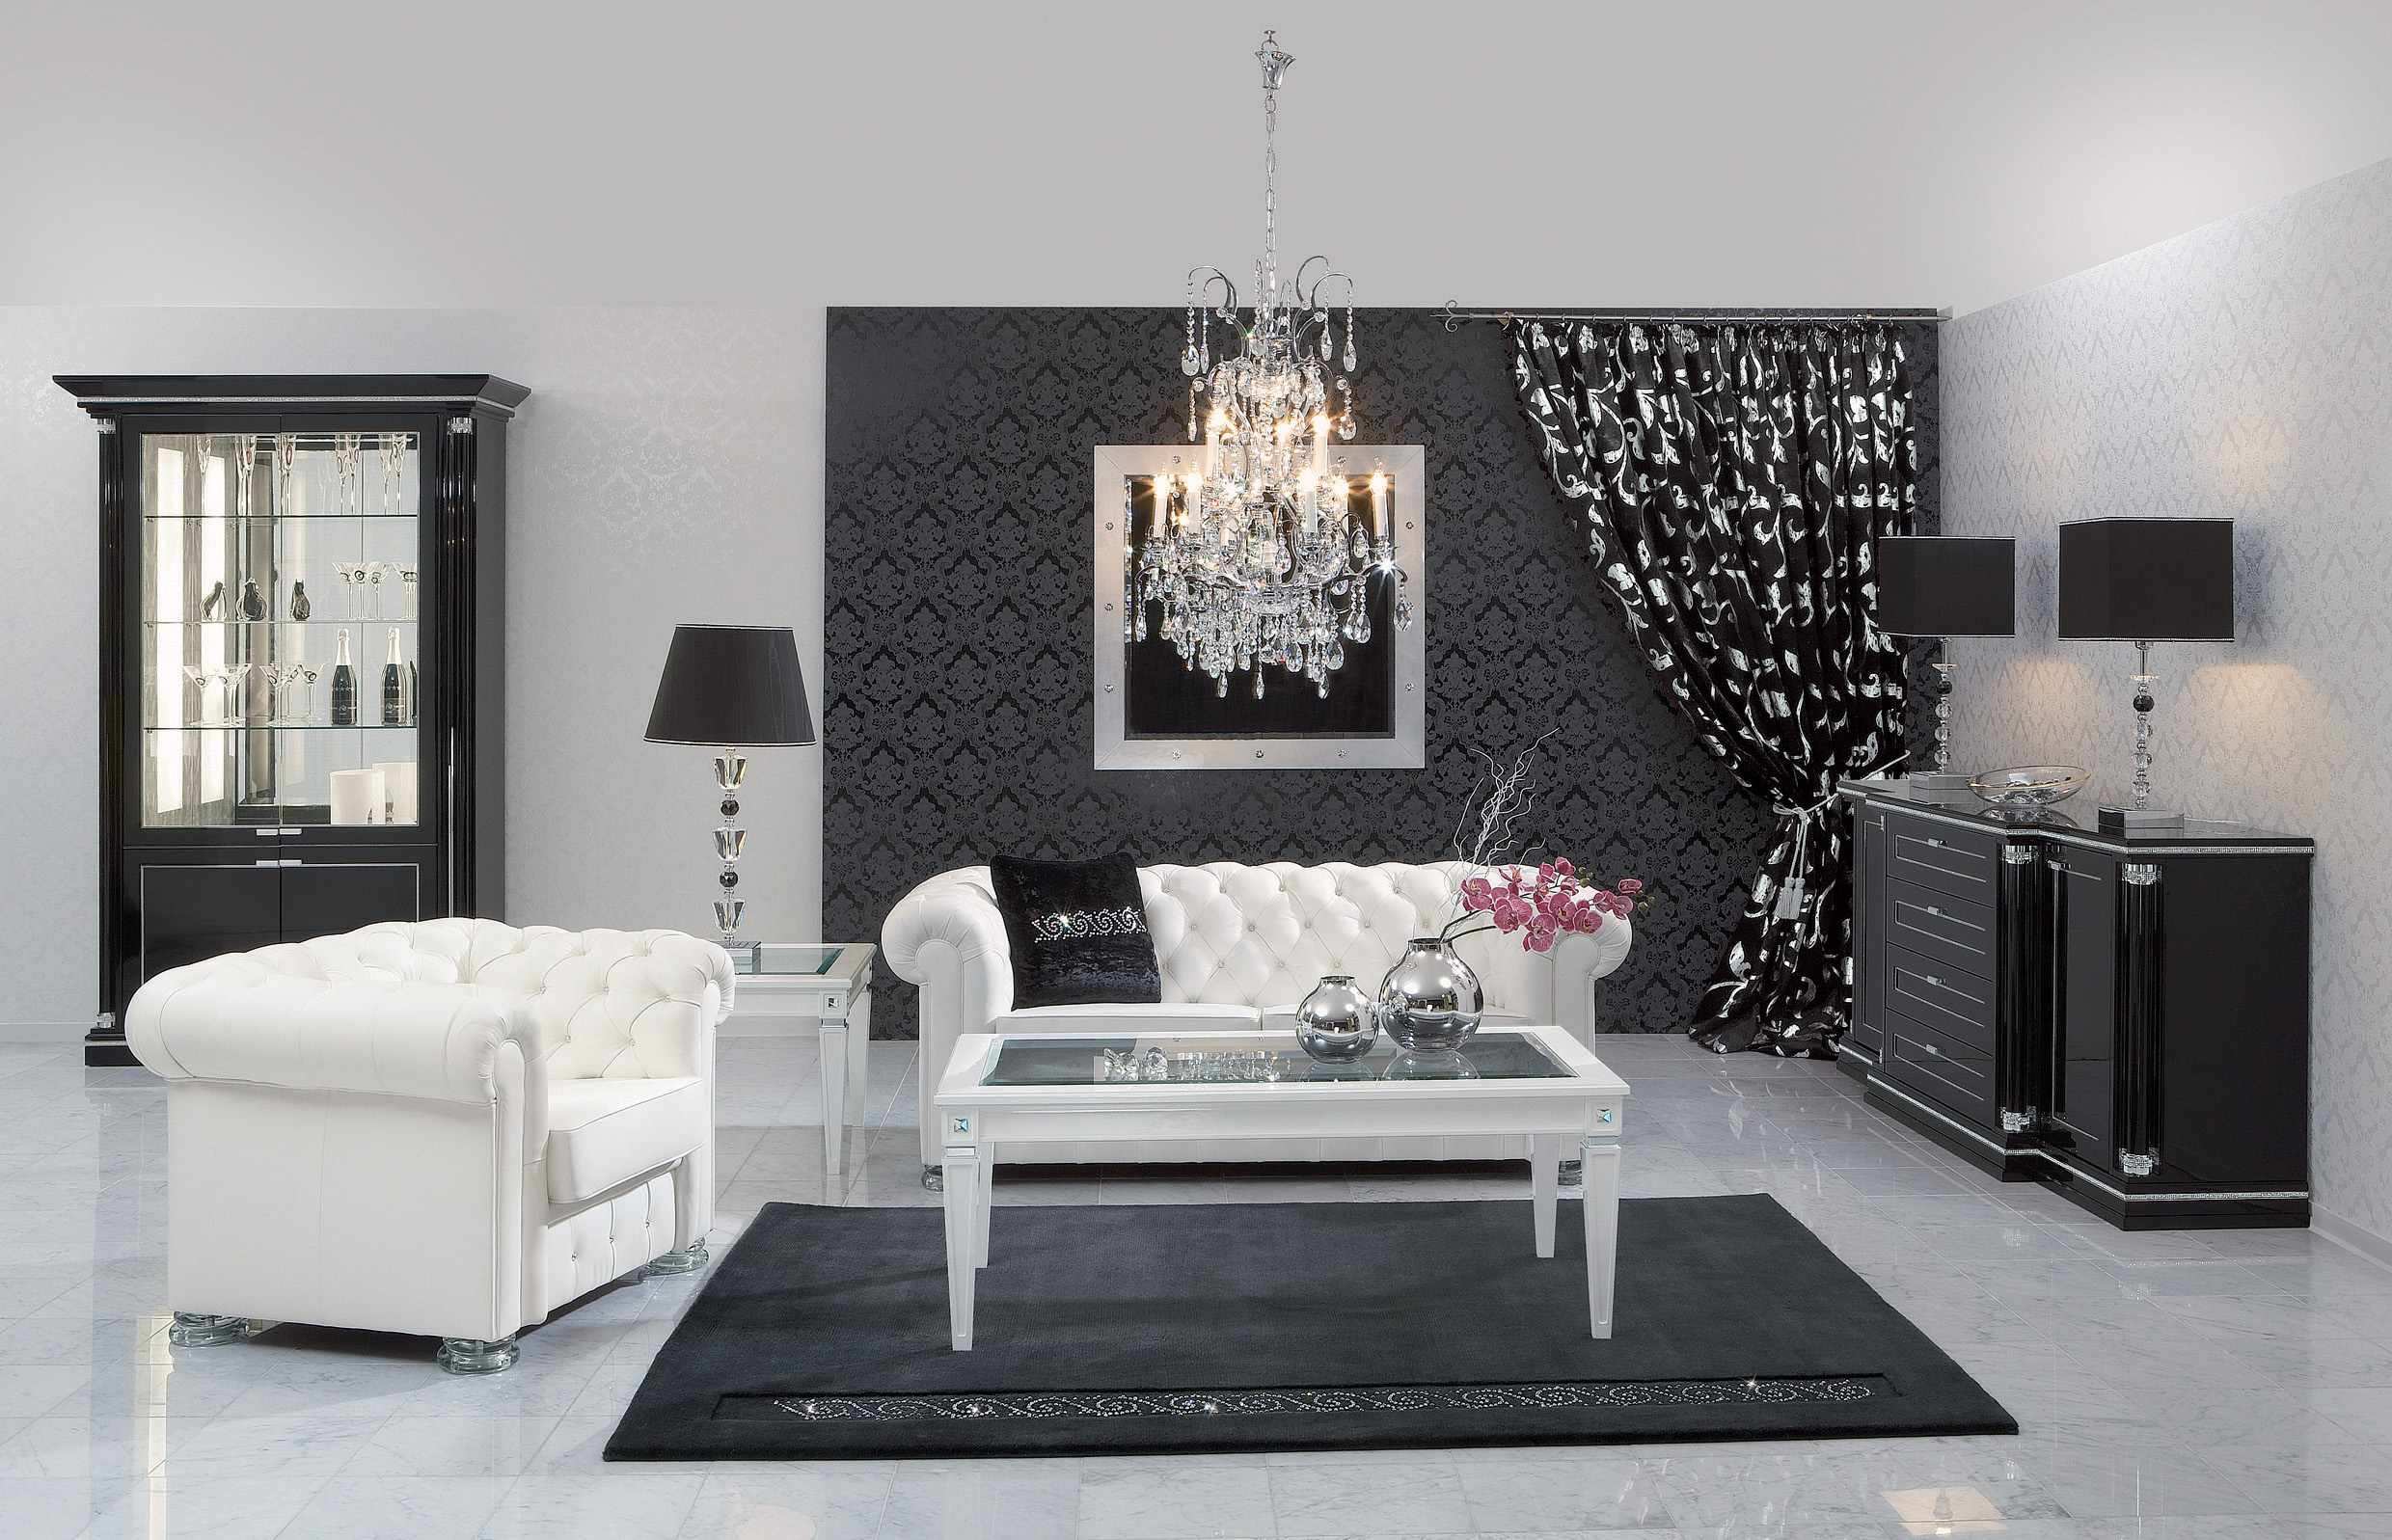 Black and White Living Room Design and Ideas - InspirationSeek.com